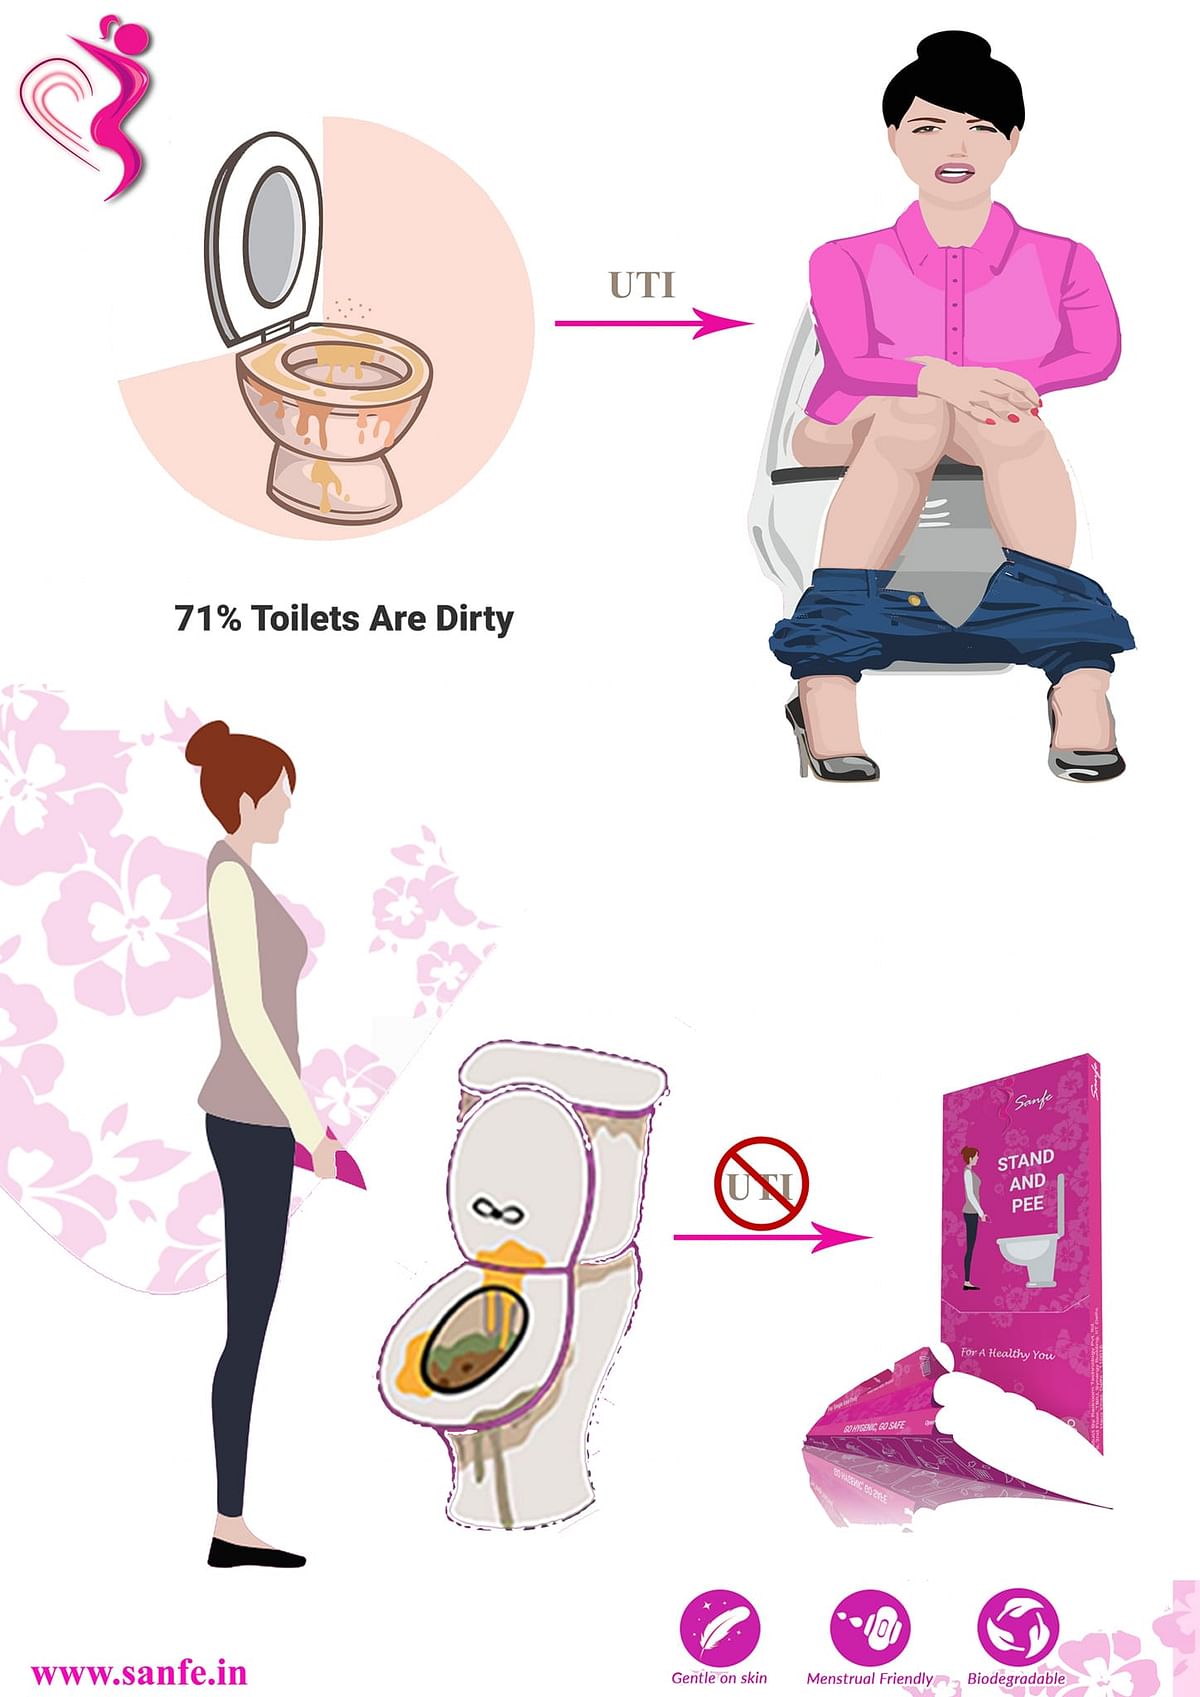 A peeing device that helps women stand and pee! But...what’s new this time? 